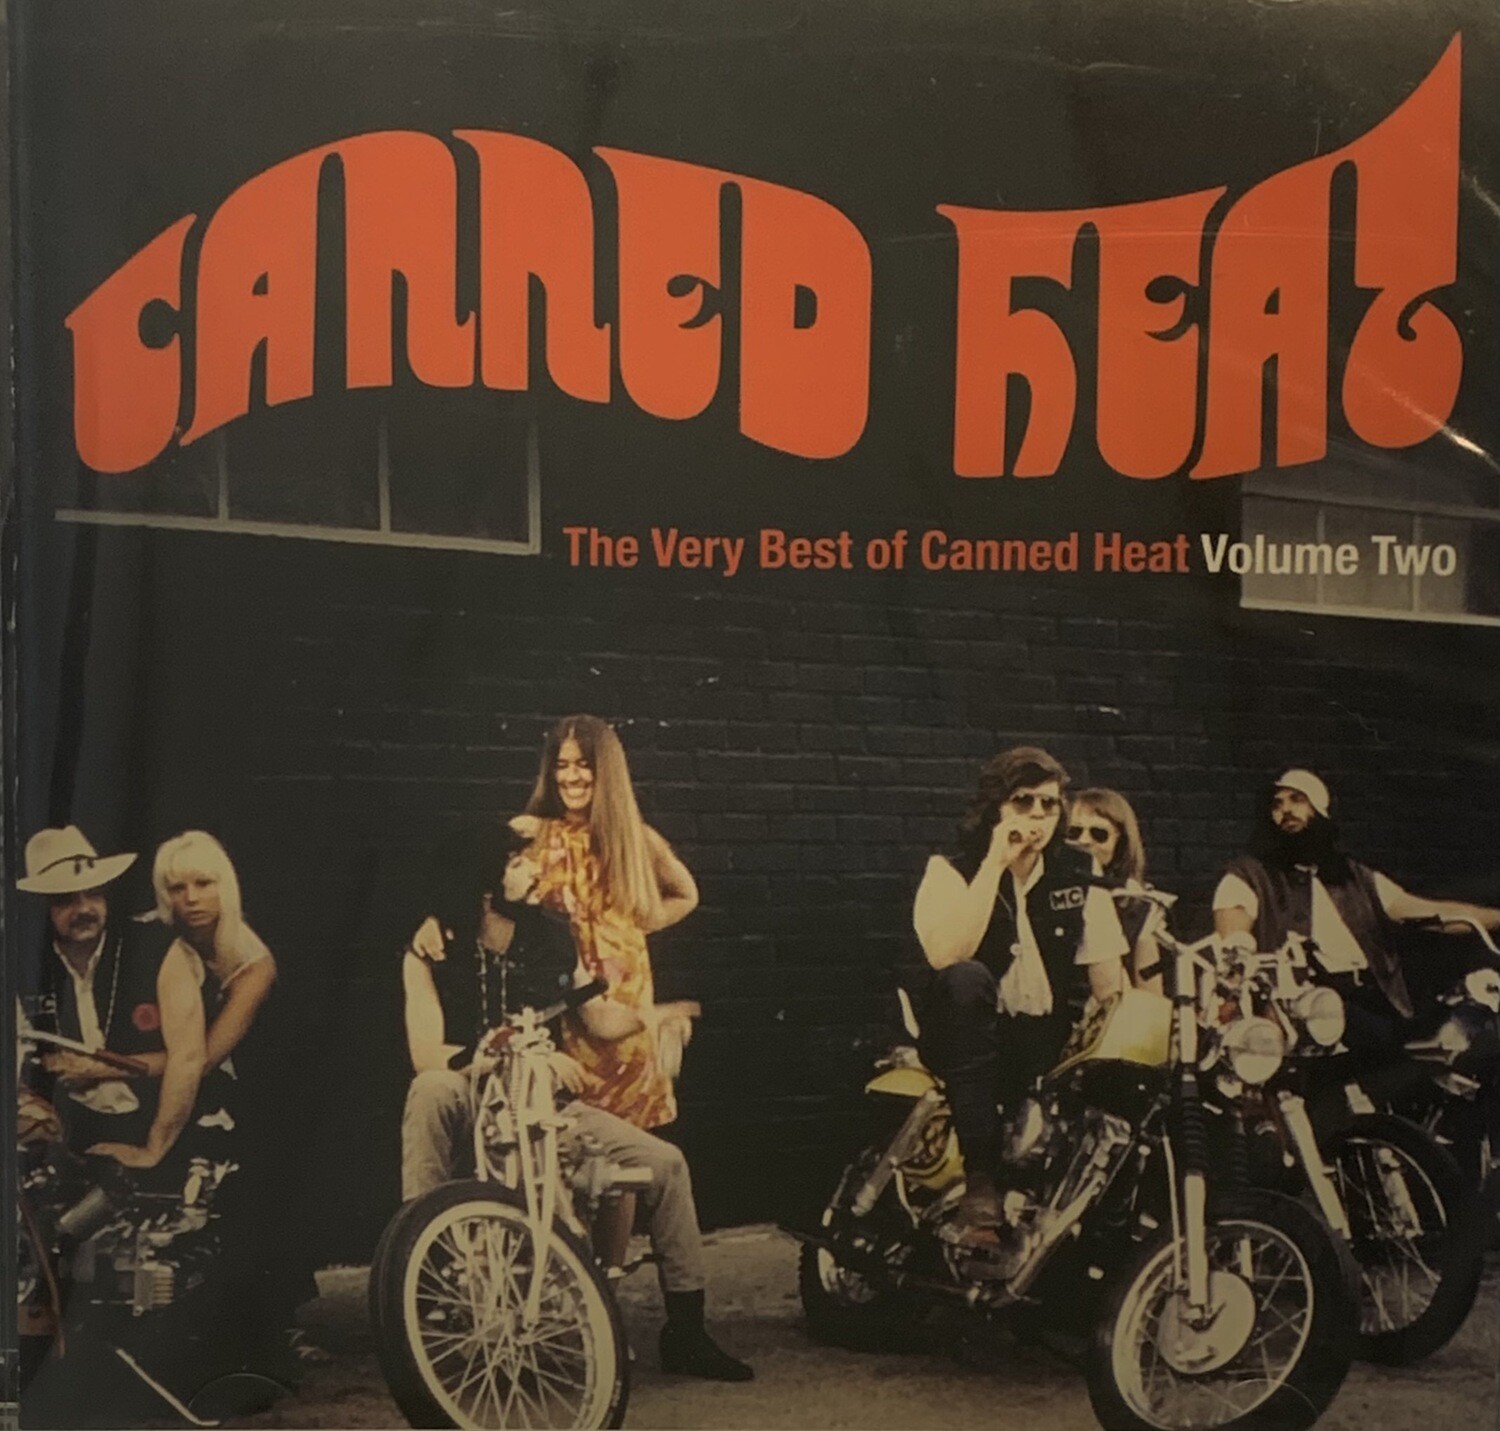 The Very Best of Canned Heat Vol. 2 CD